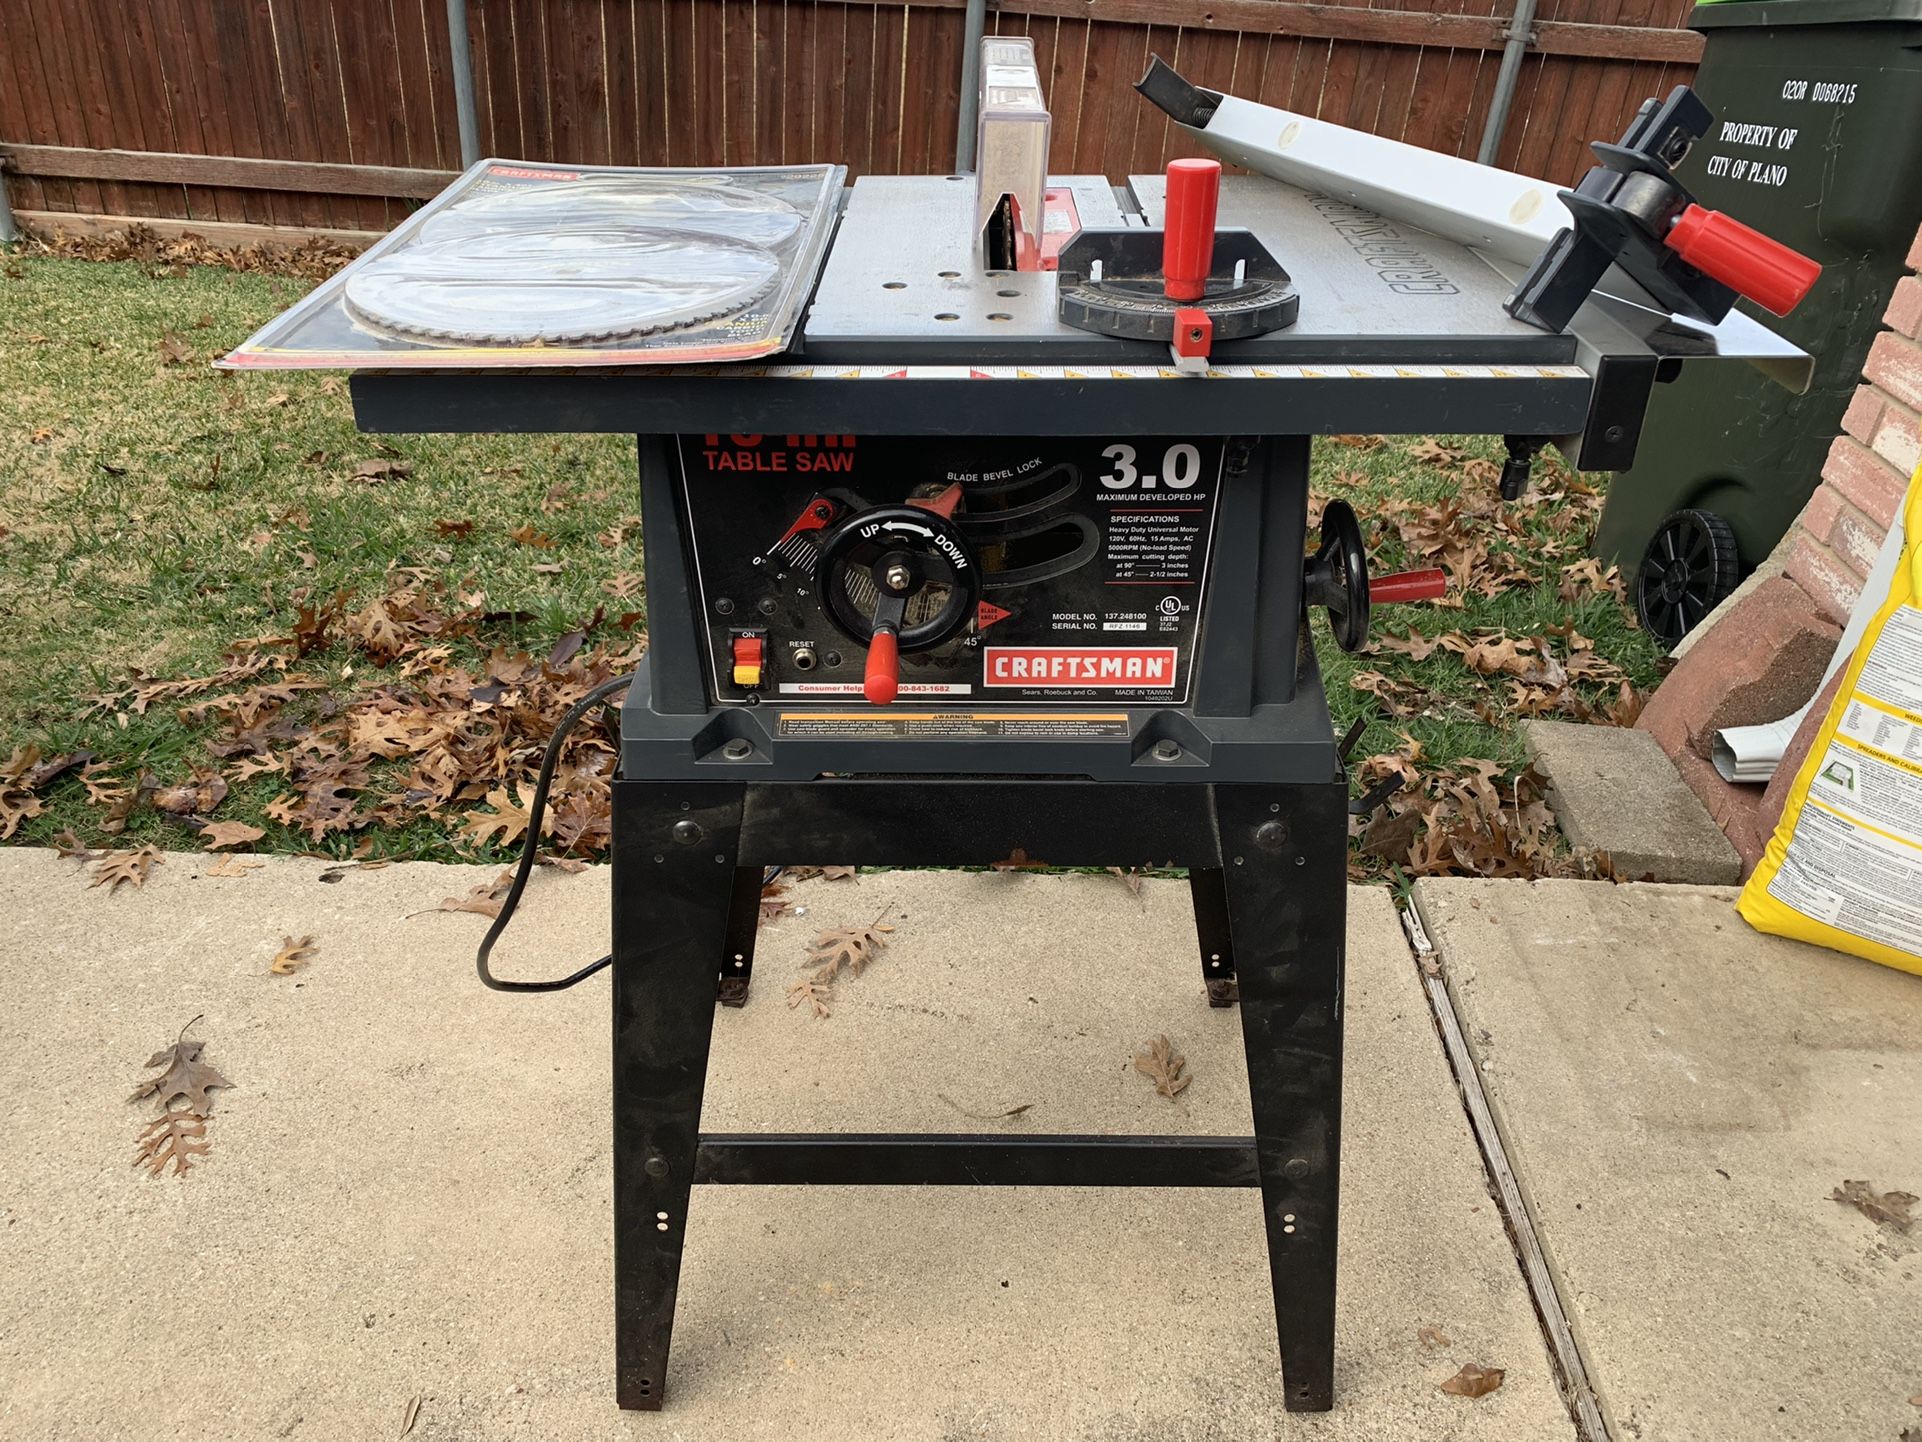 craftsman evolv 10 inch table saw for Sale in Mckinney, TX - OfferUp